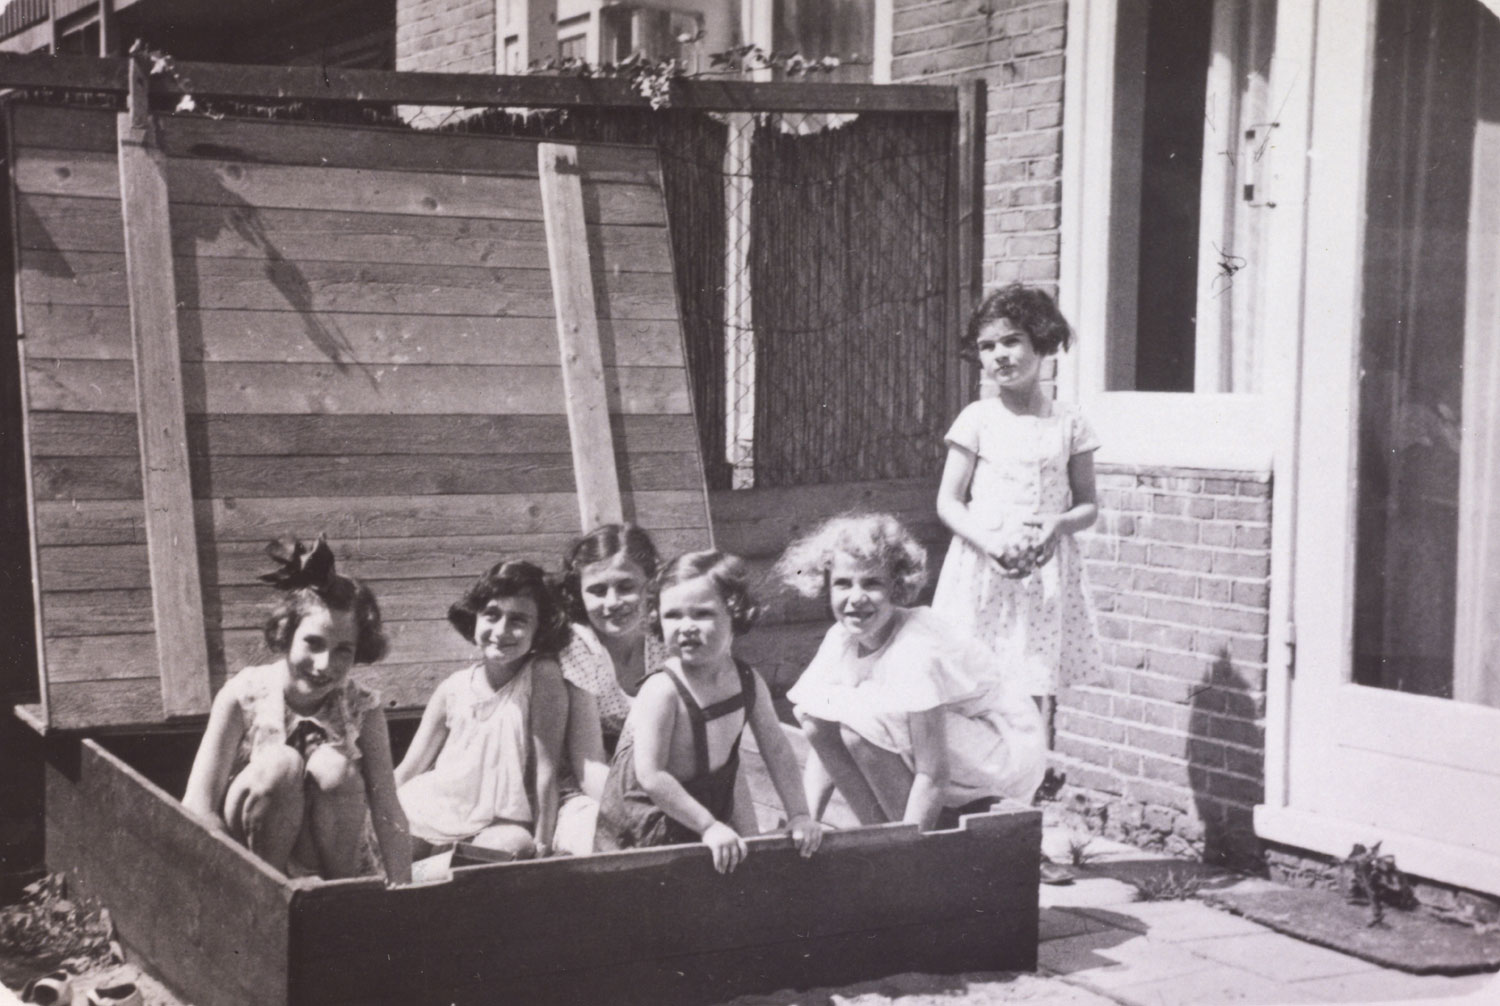 Left to right: Hanneli Goslar (a.k.a., "Lies Goosens" in early editions of the Diary), Anne Frank, Dolly Citroen, Hannah Toby, Barbara Ledermann and Susanne Ledermann (standing), Amsterdam, 1937.